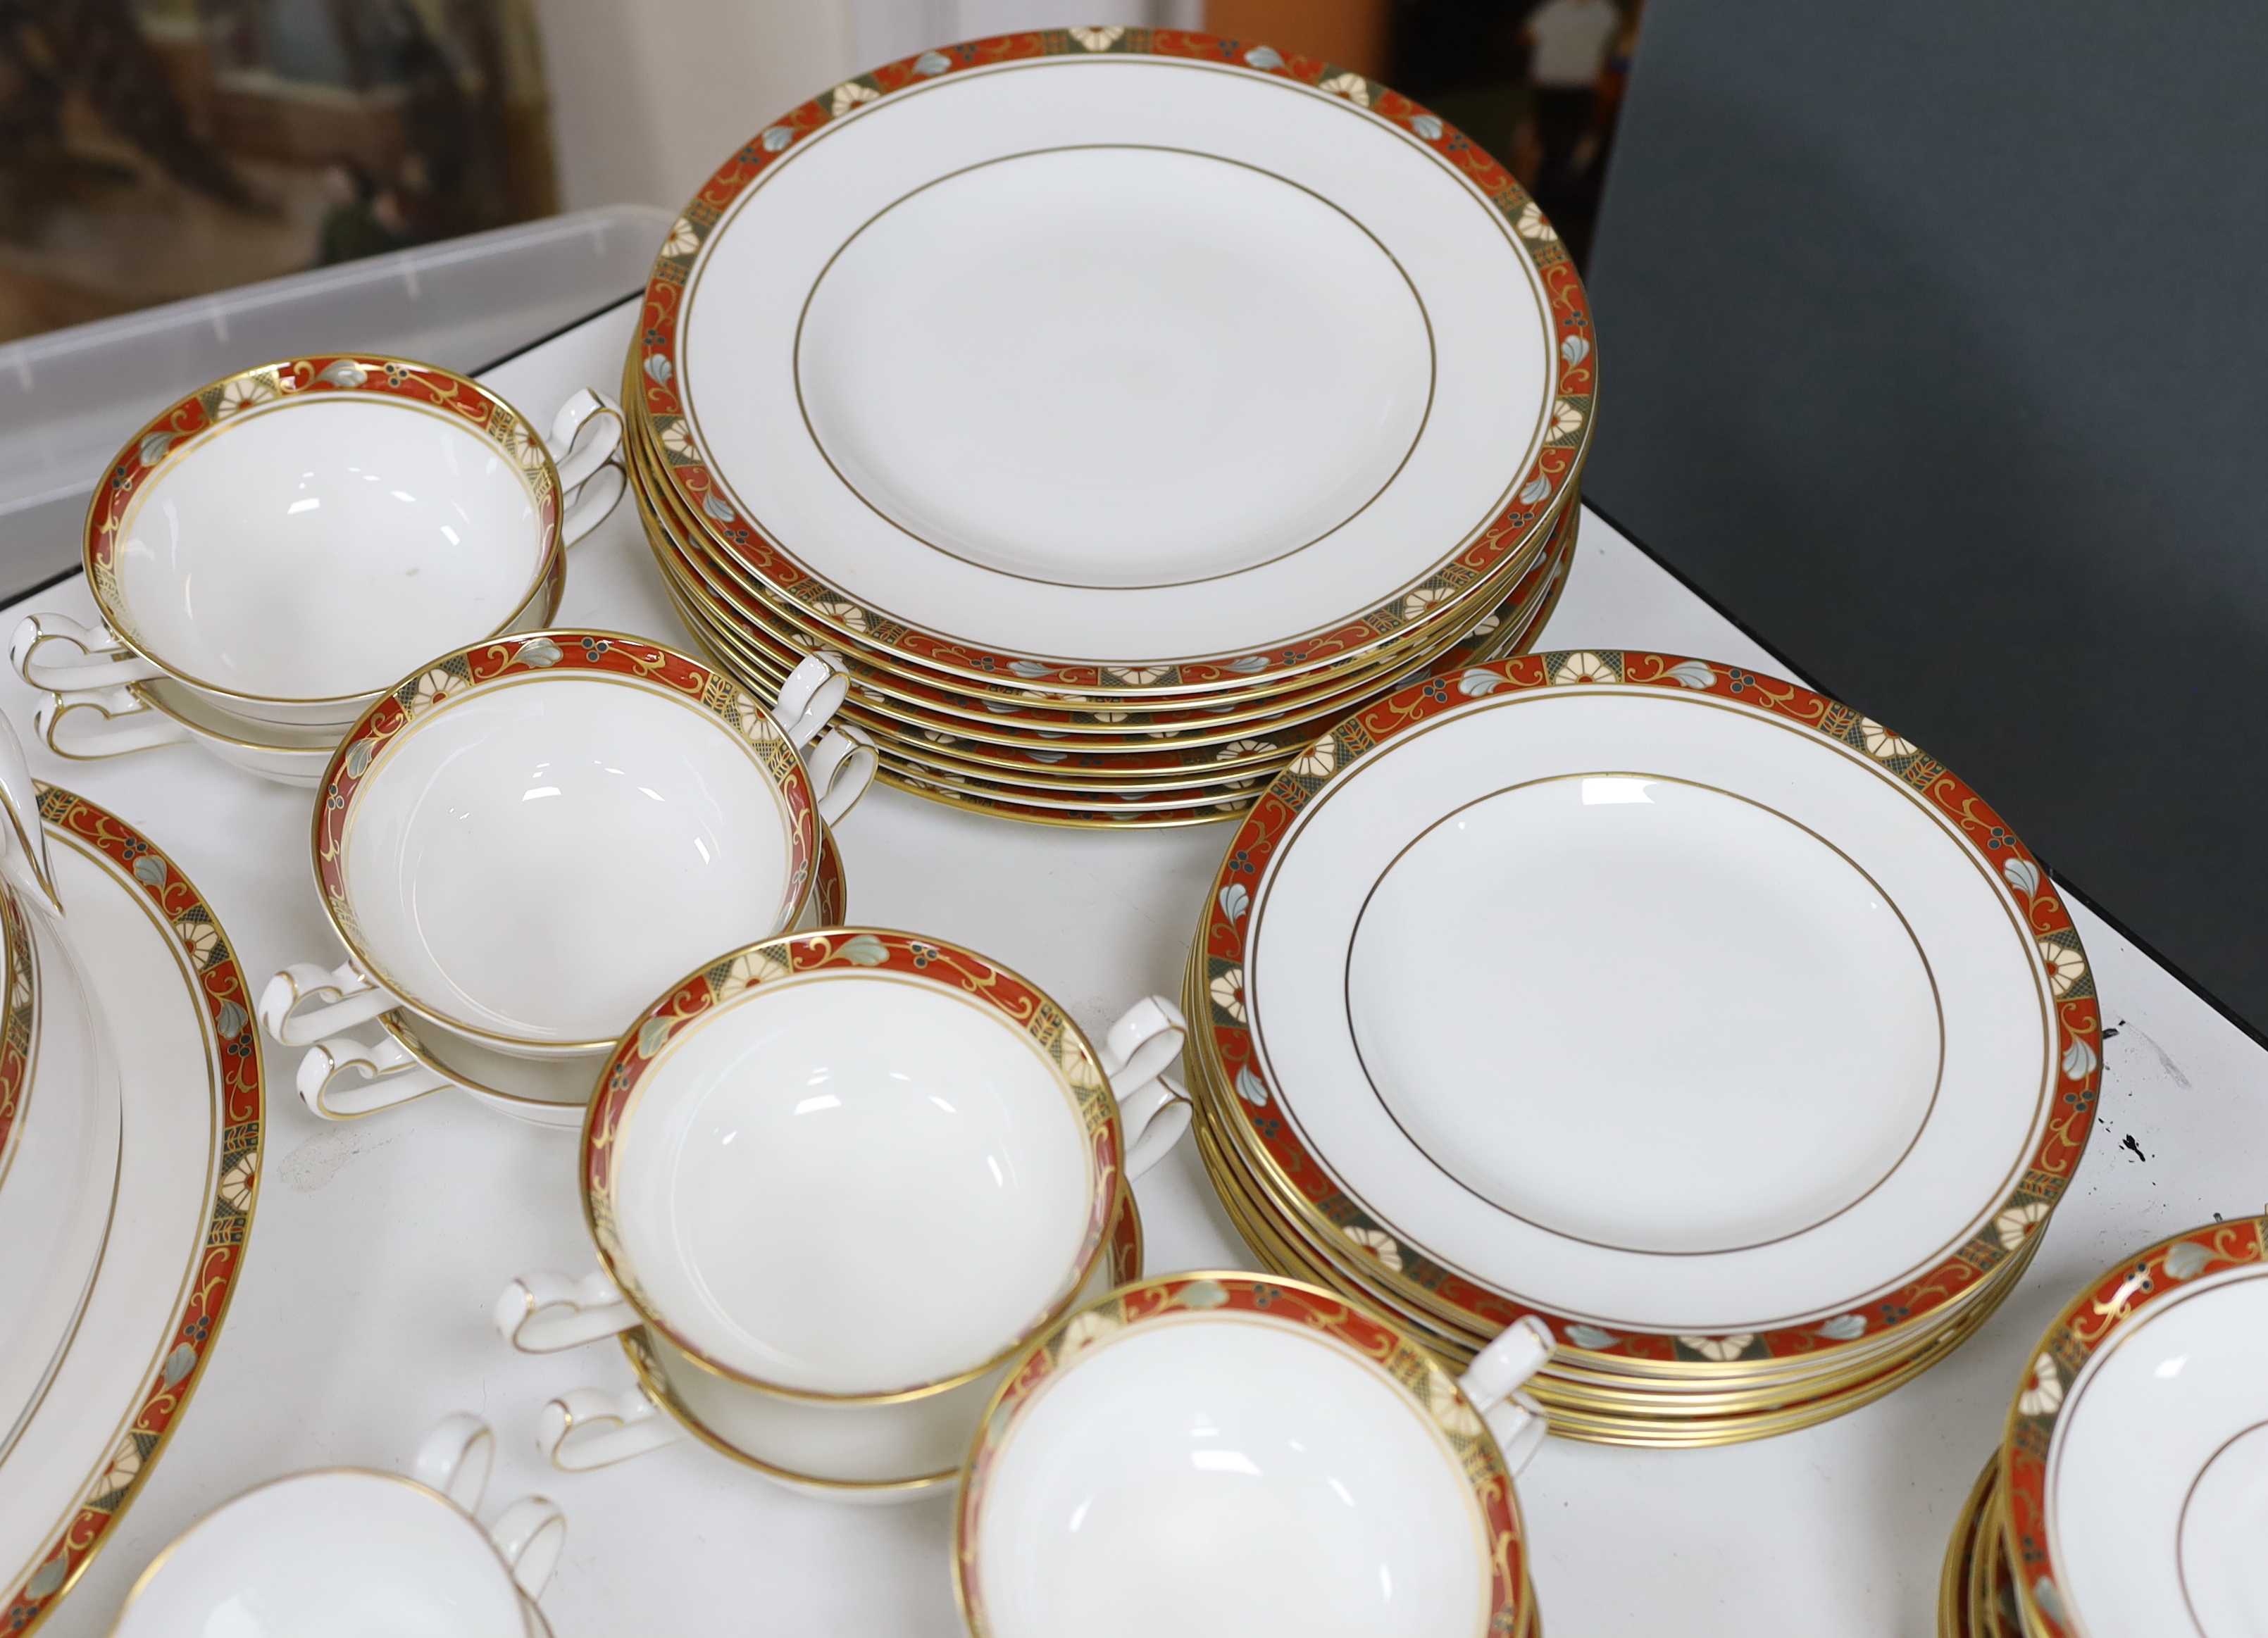 A Royal Crown Derby Cloisonné pattern tea and dinner service for 8 settings